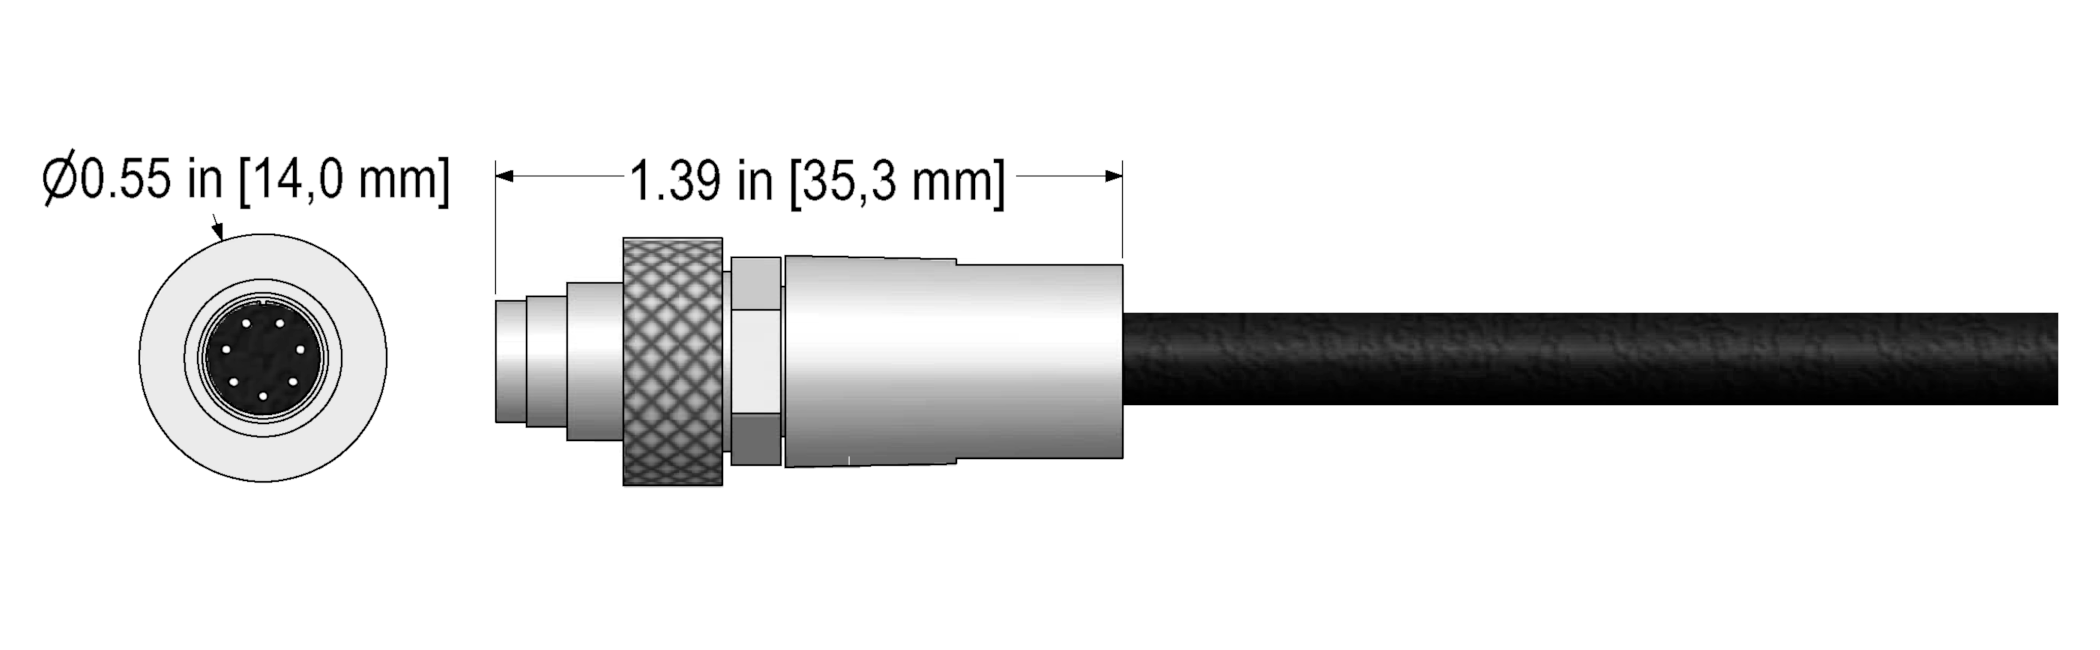 A line drawing showing the diameter and length of an assembled CTC C84 vibration sensor connector kit.